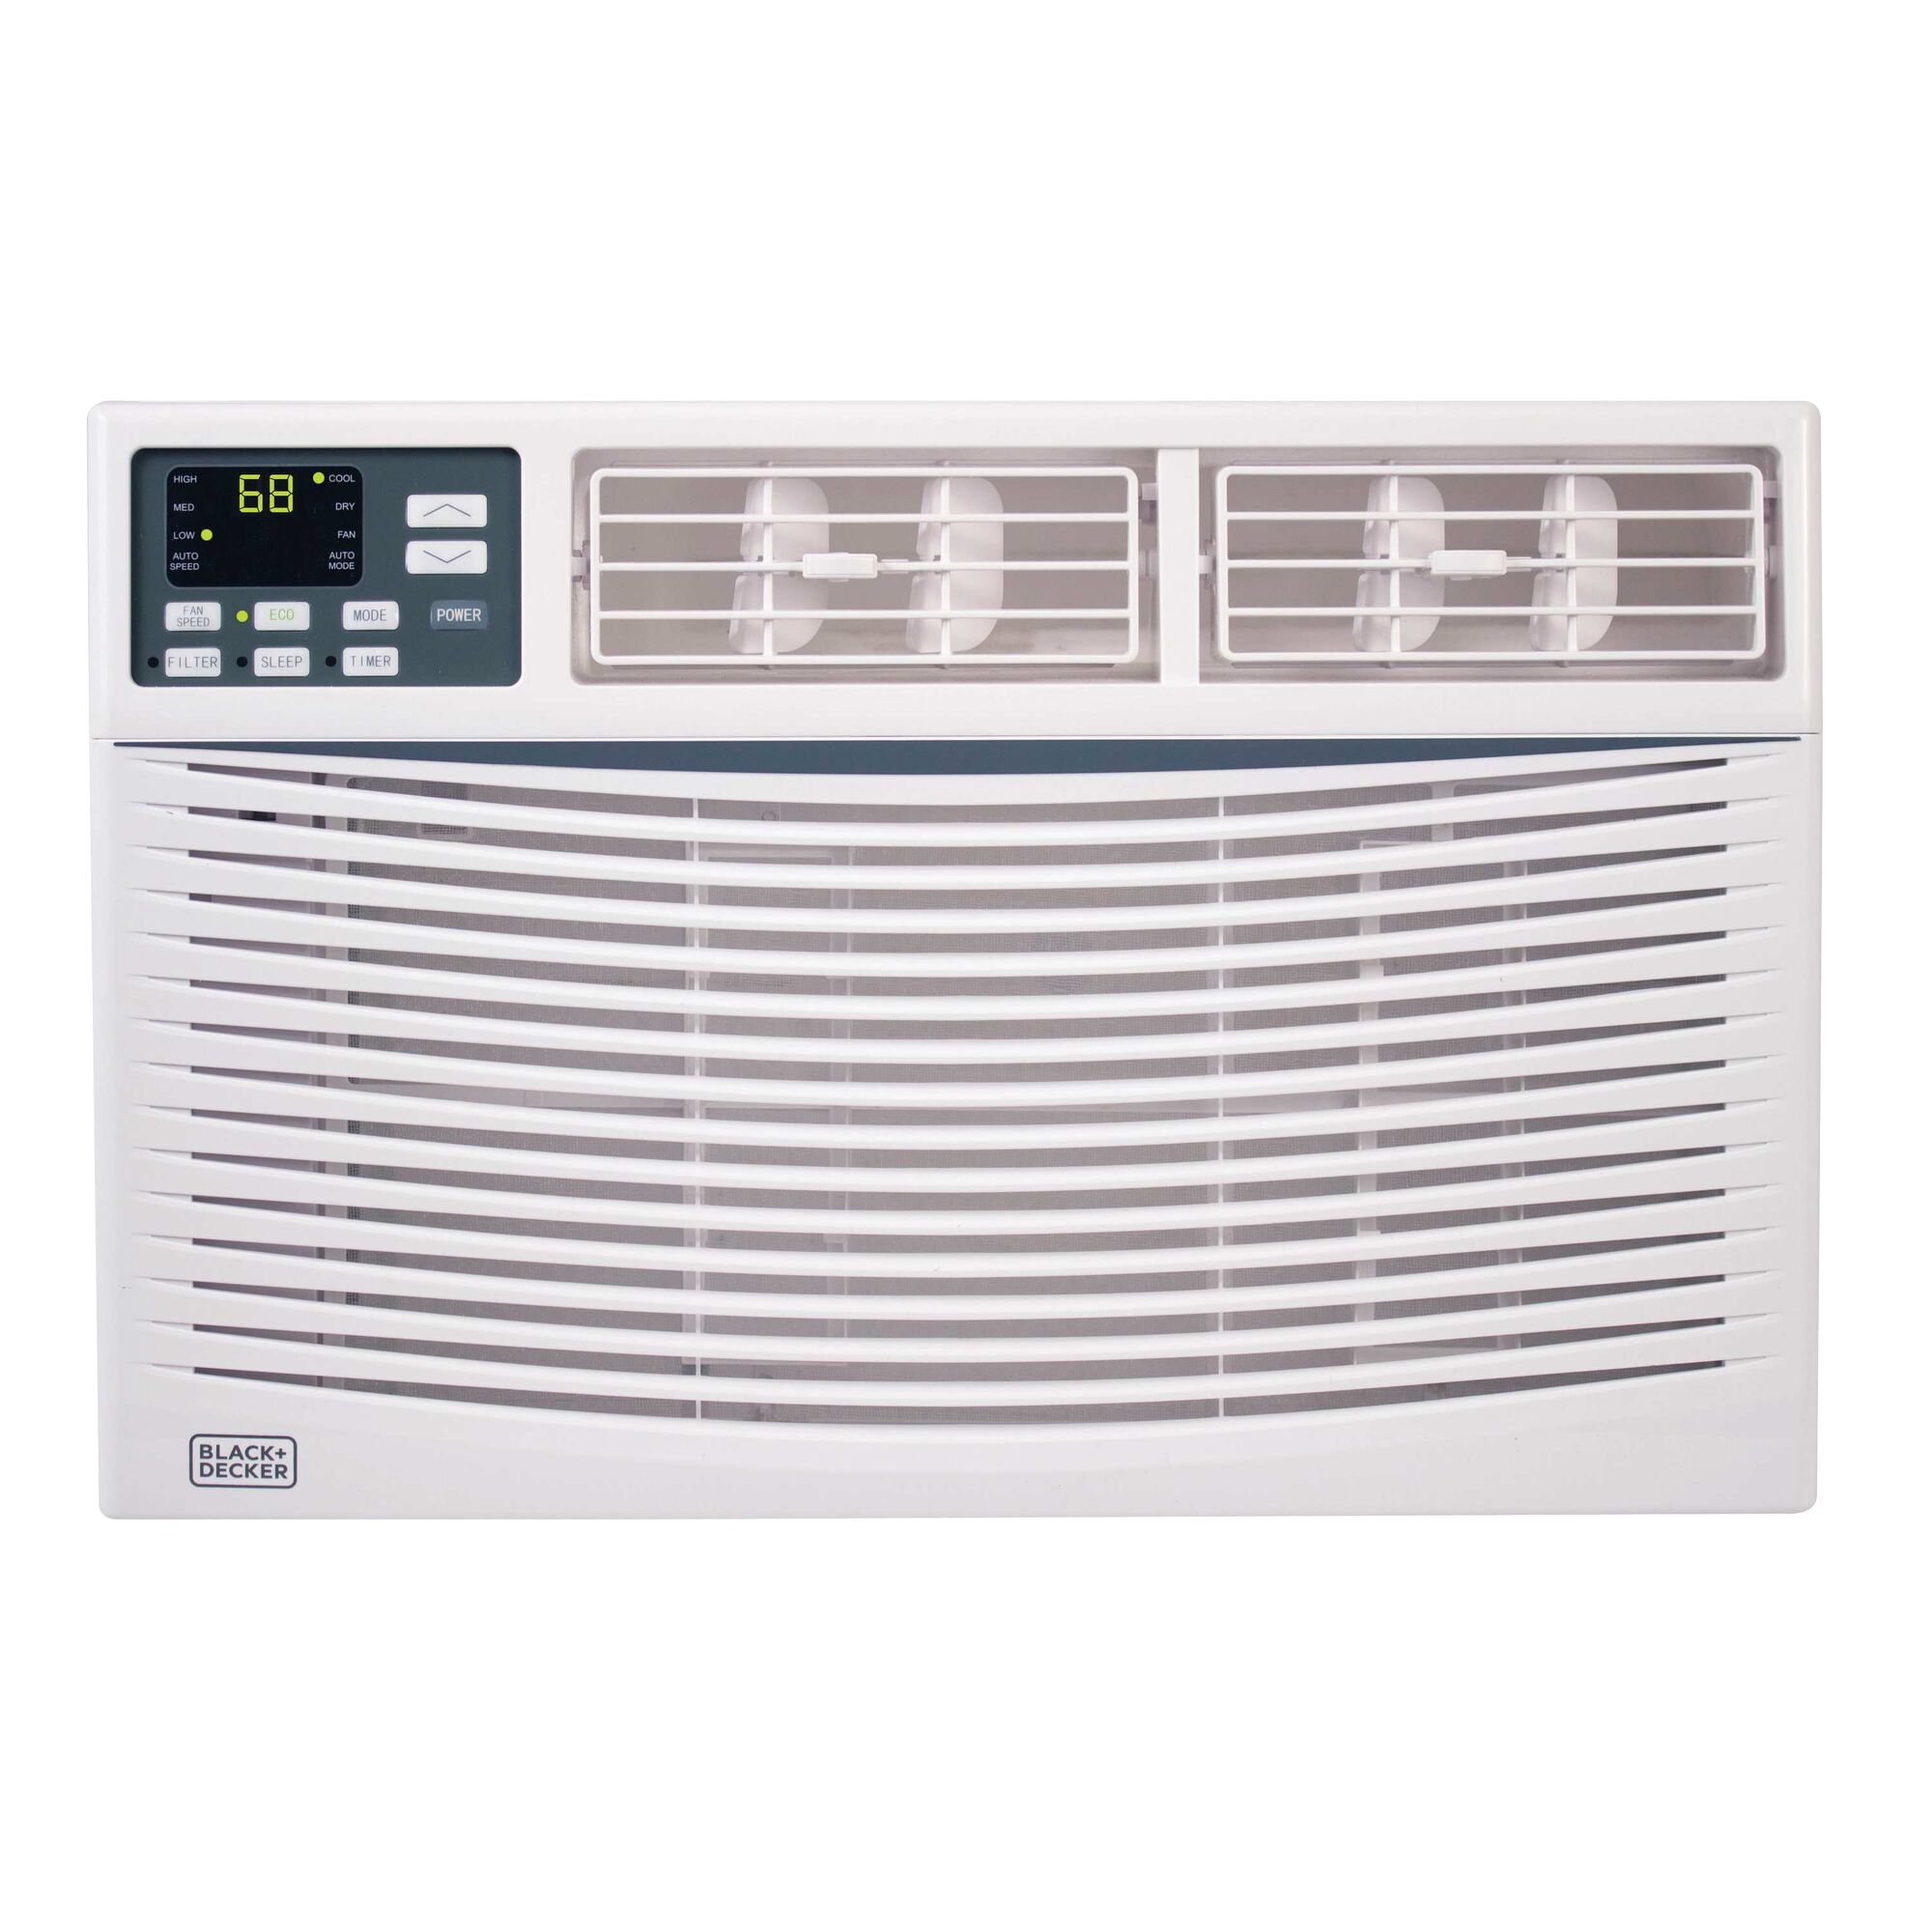 12000 Energy Star Electronic Air Conditioner with Remote.